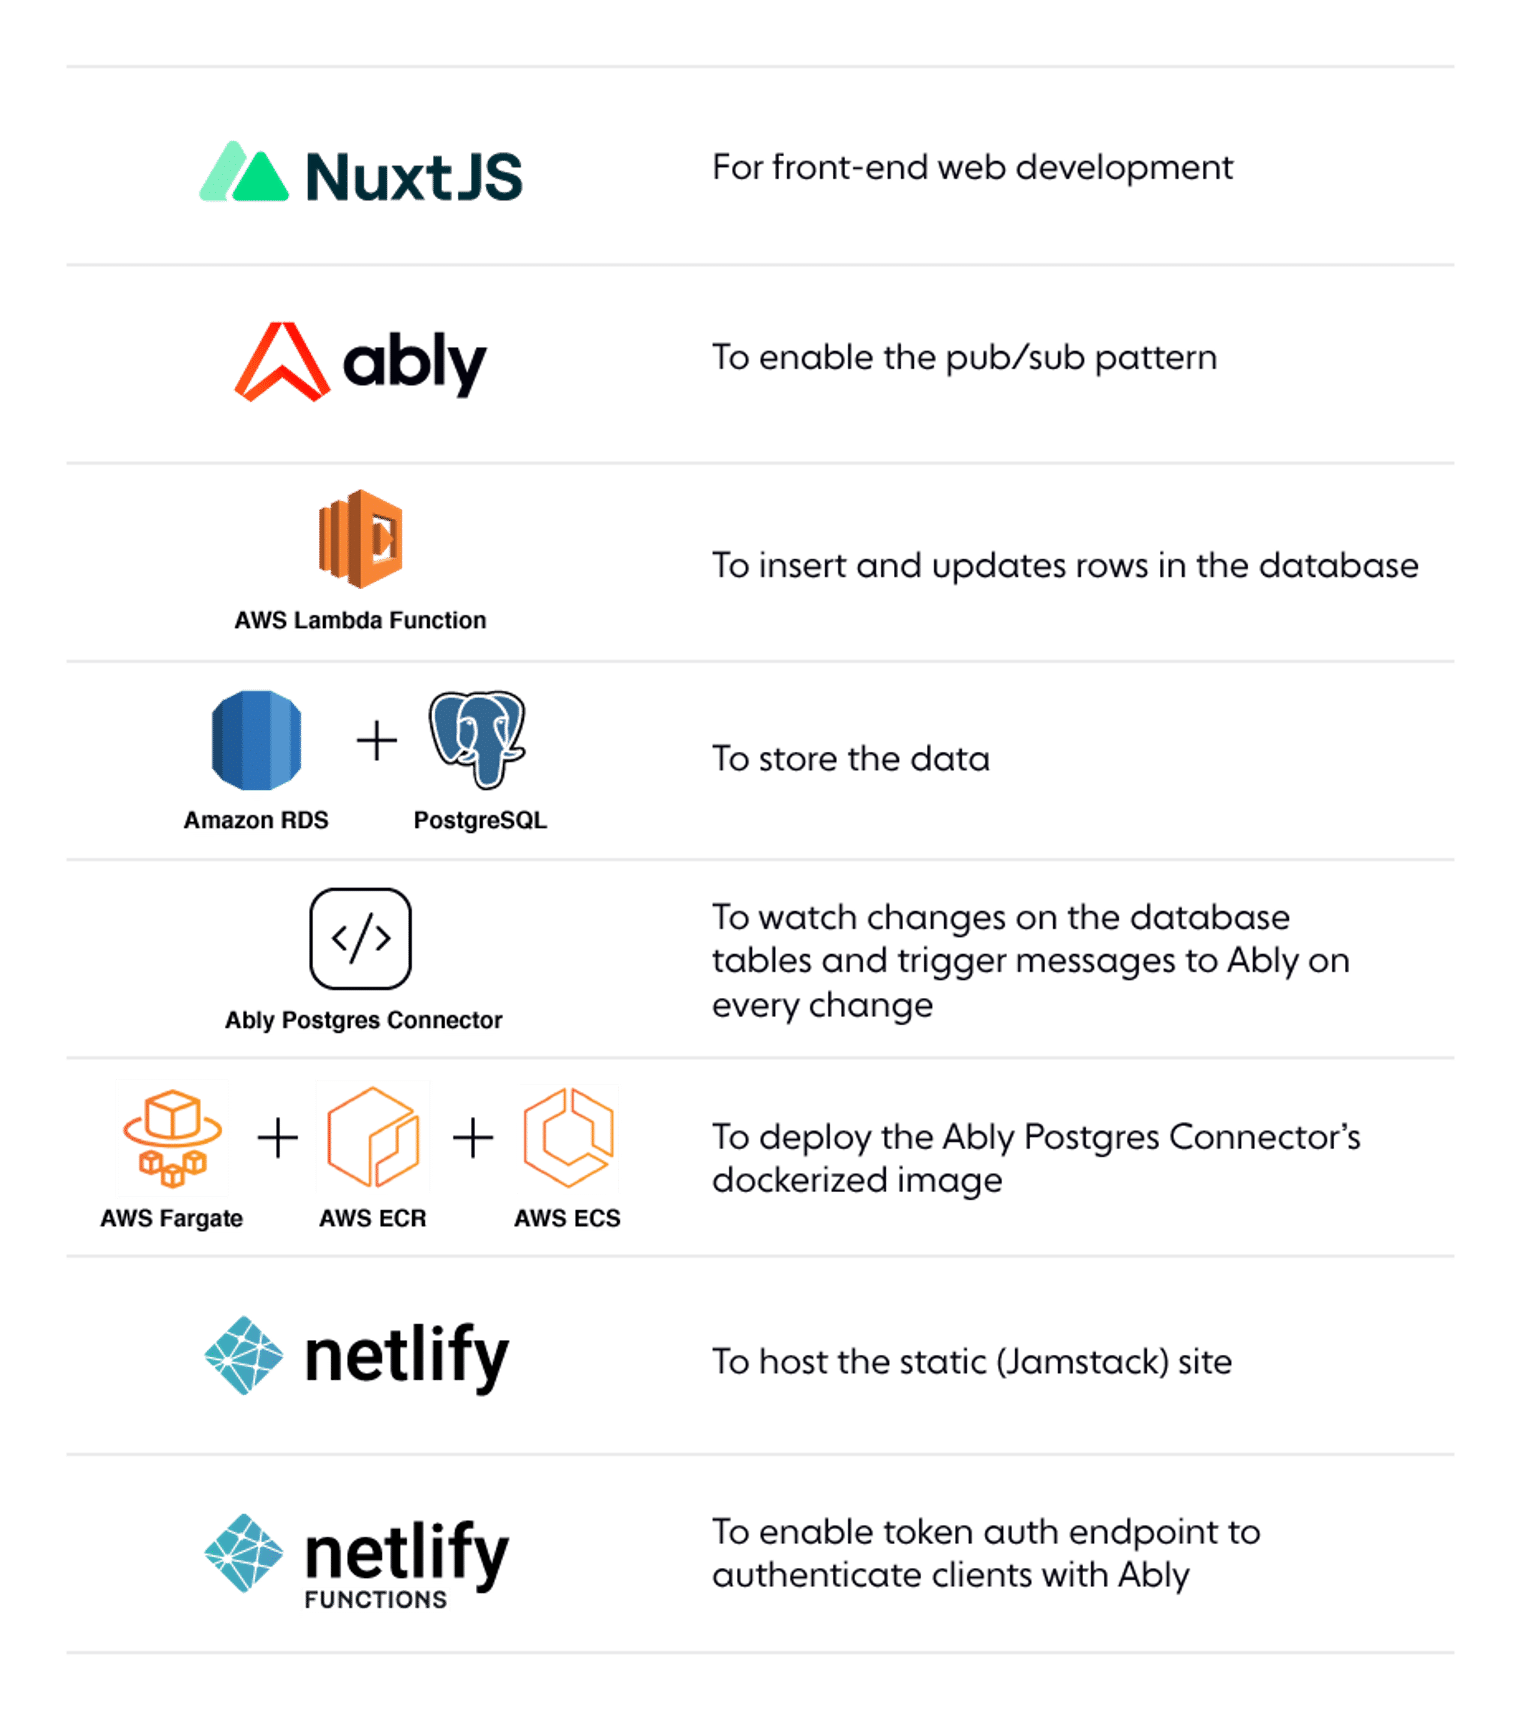 Tech stack of the editable chat app: Nuxt.js, Ably, AWS Lambda Function, PostgresSQL, Netlify, and more.